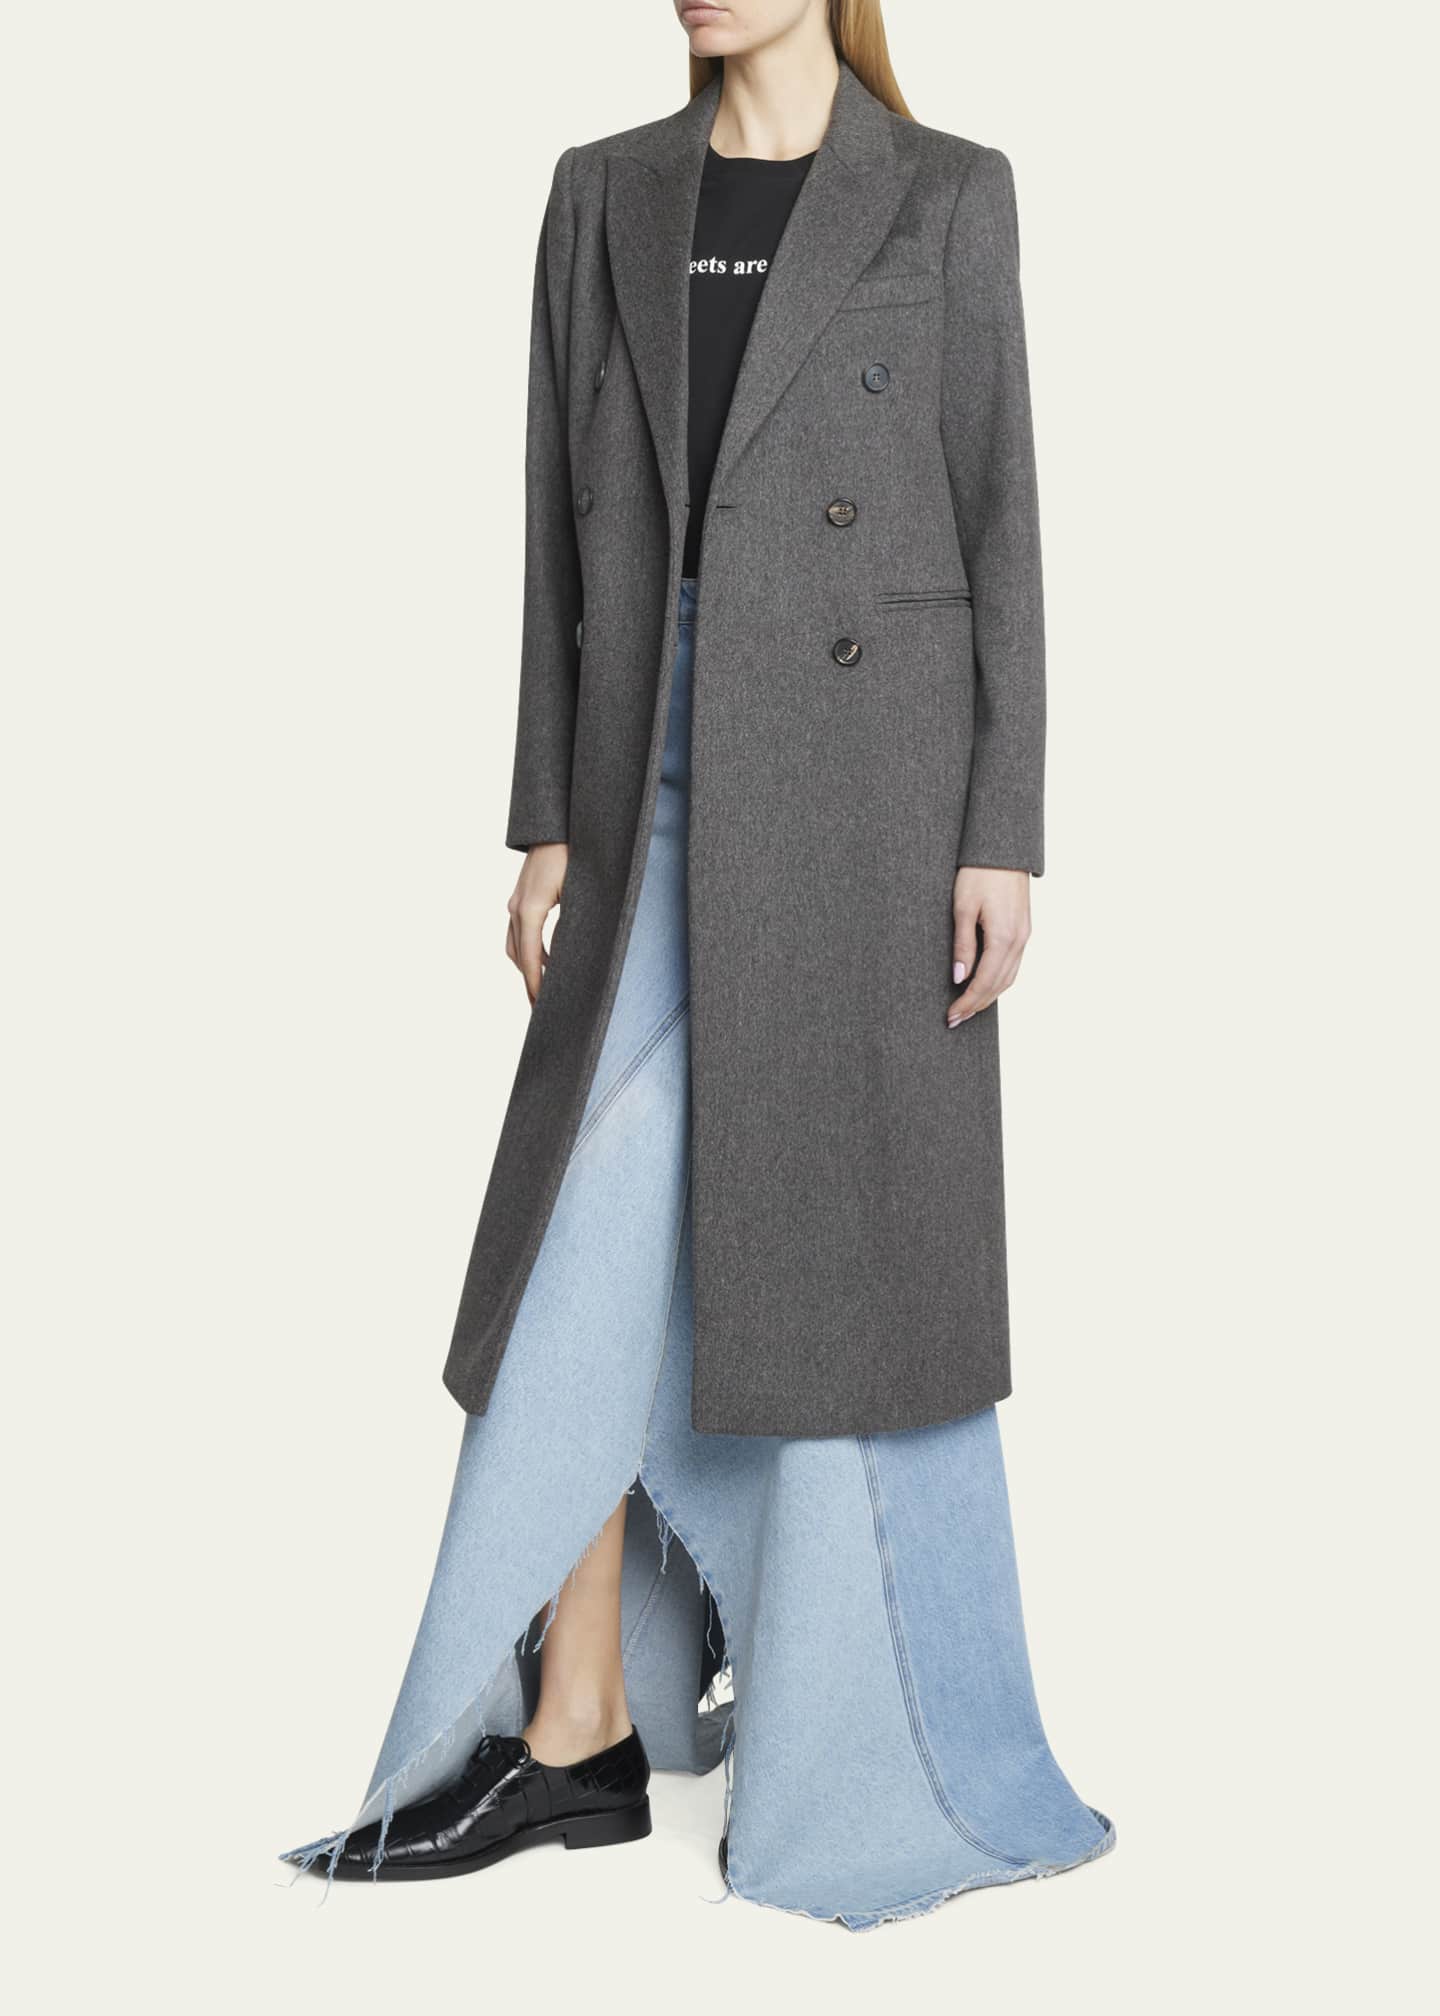 Victoria Beckham Women's Double-Breasted Tailored Slim Wool Coat